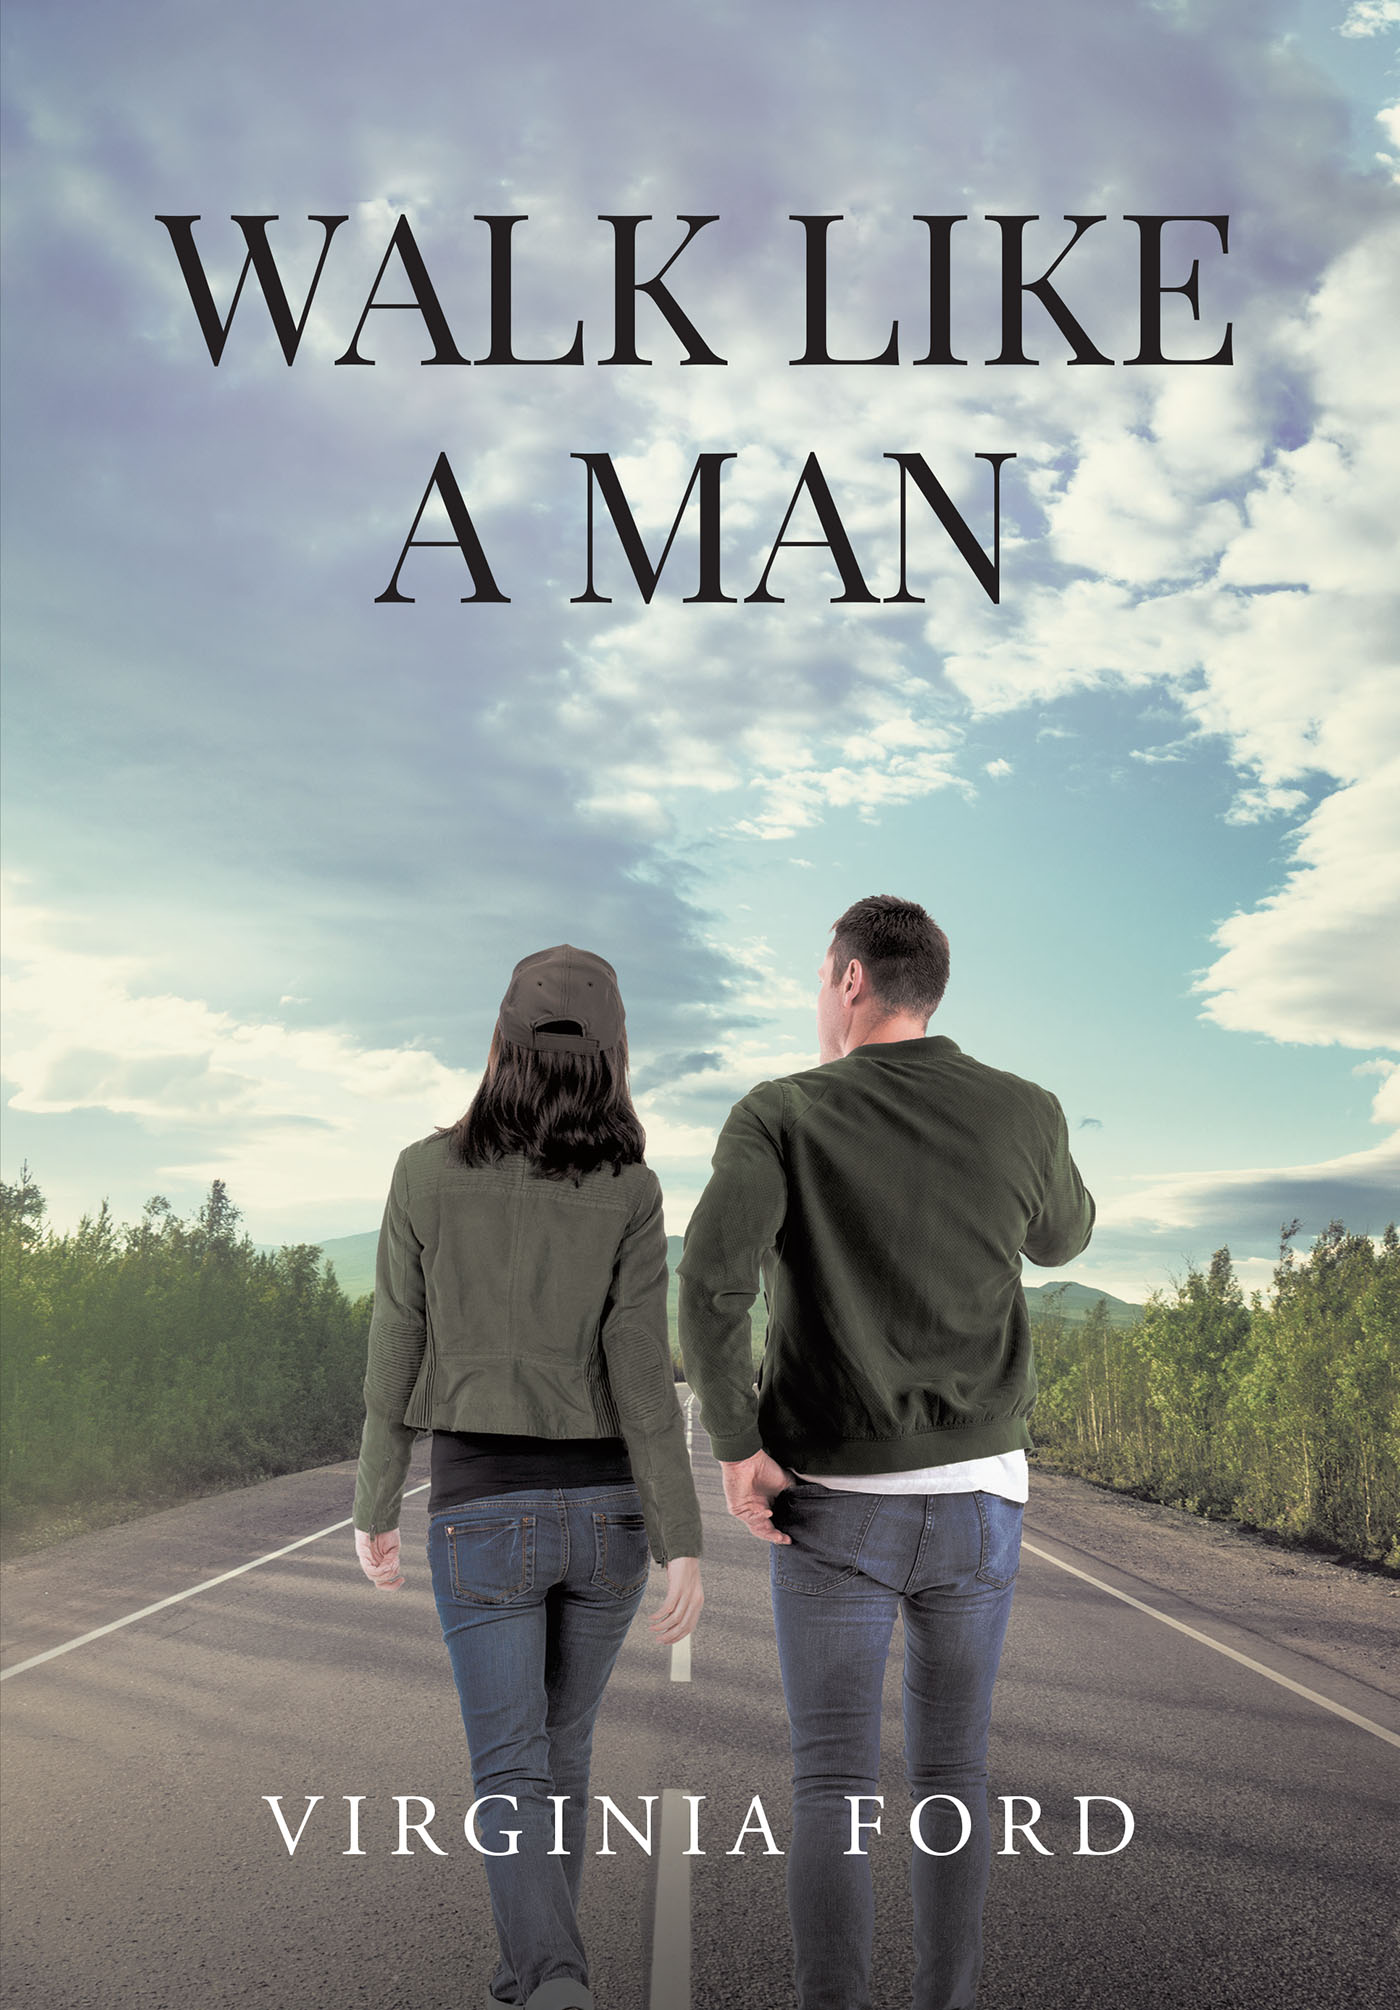 Author Virginia Ford’s New Book, "Walk Like a Man," Takes Readers on an Intimate Journey to Experience How the Author's Early Life Shaped Her Into Who She is Today